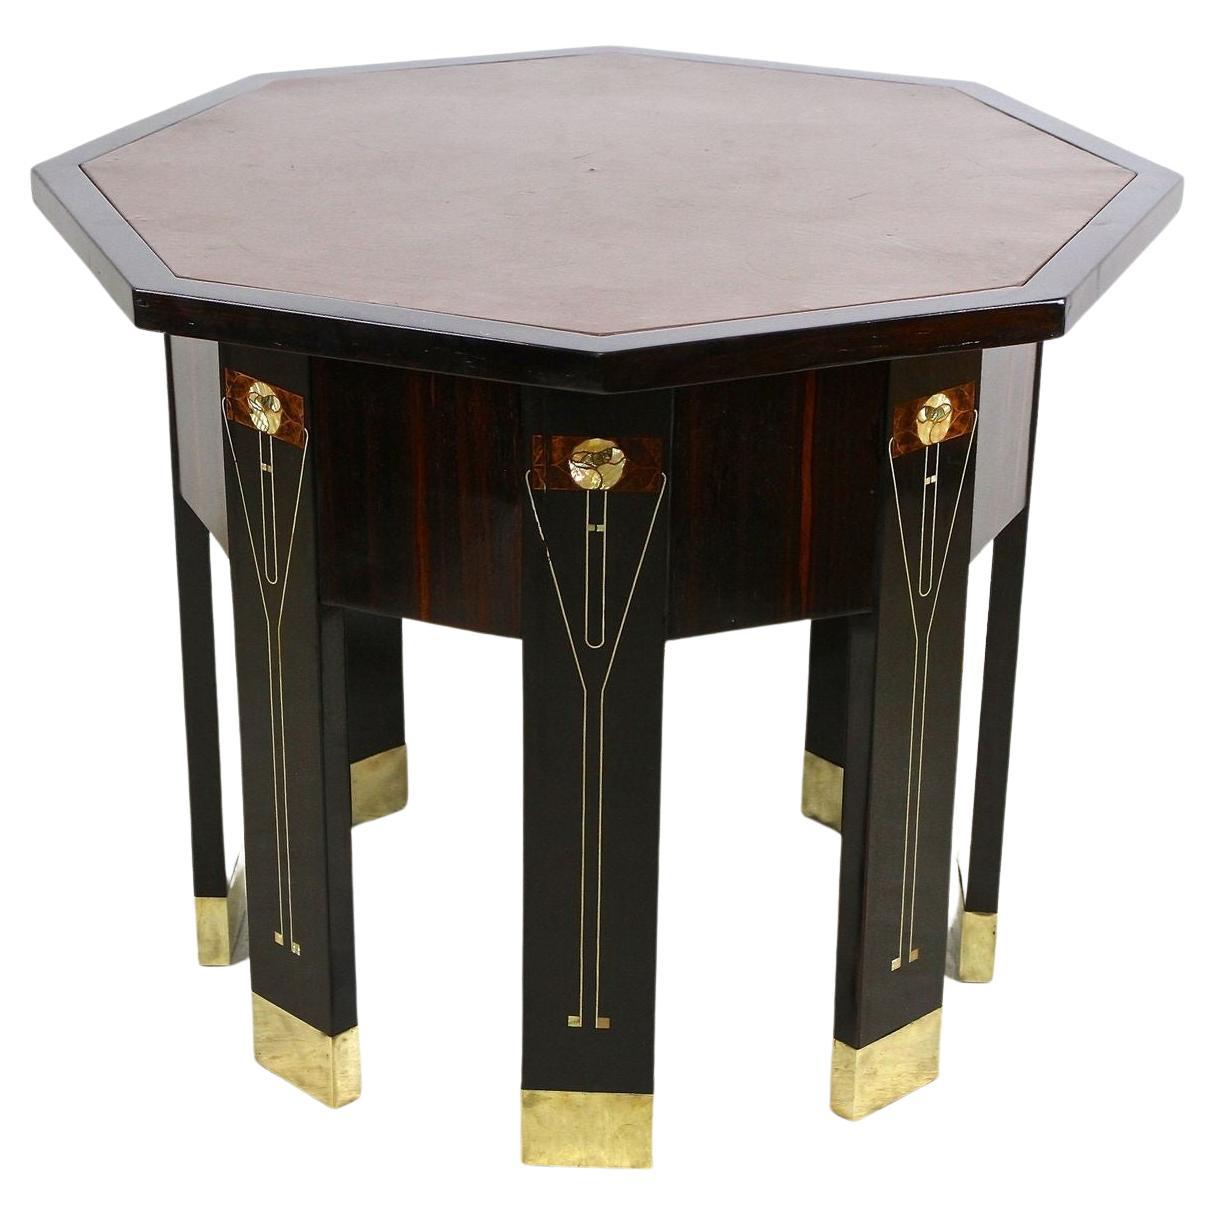 Art Nouveau Octagonal Palisander Table with Mother of Pearl Inlays, AT ca. 1905